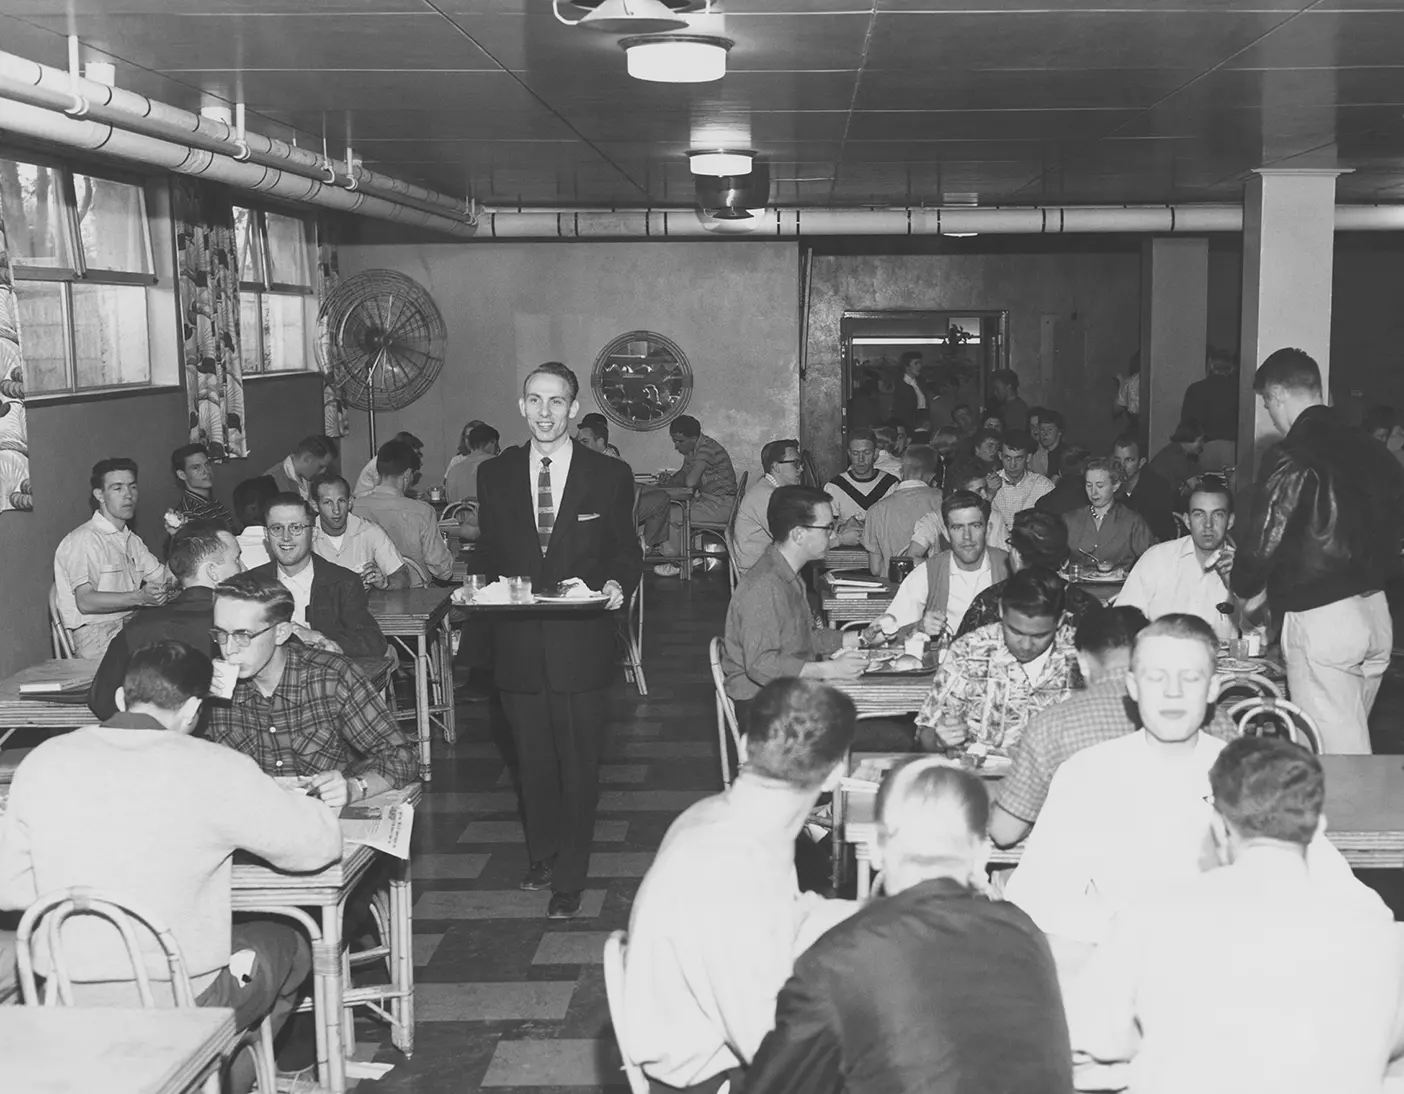 1950s students eat at the cafeteria in the old Joseph Smith Building on BYU campus.